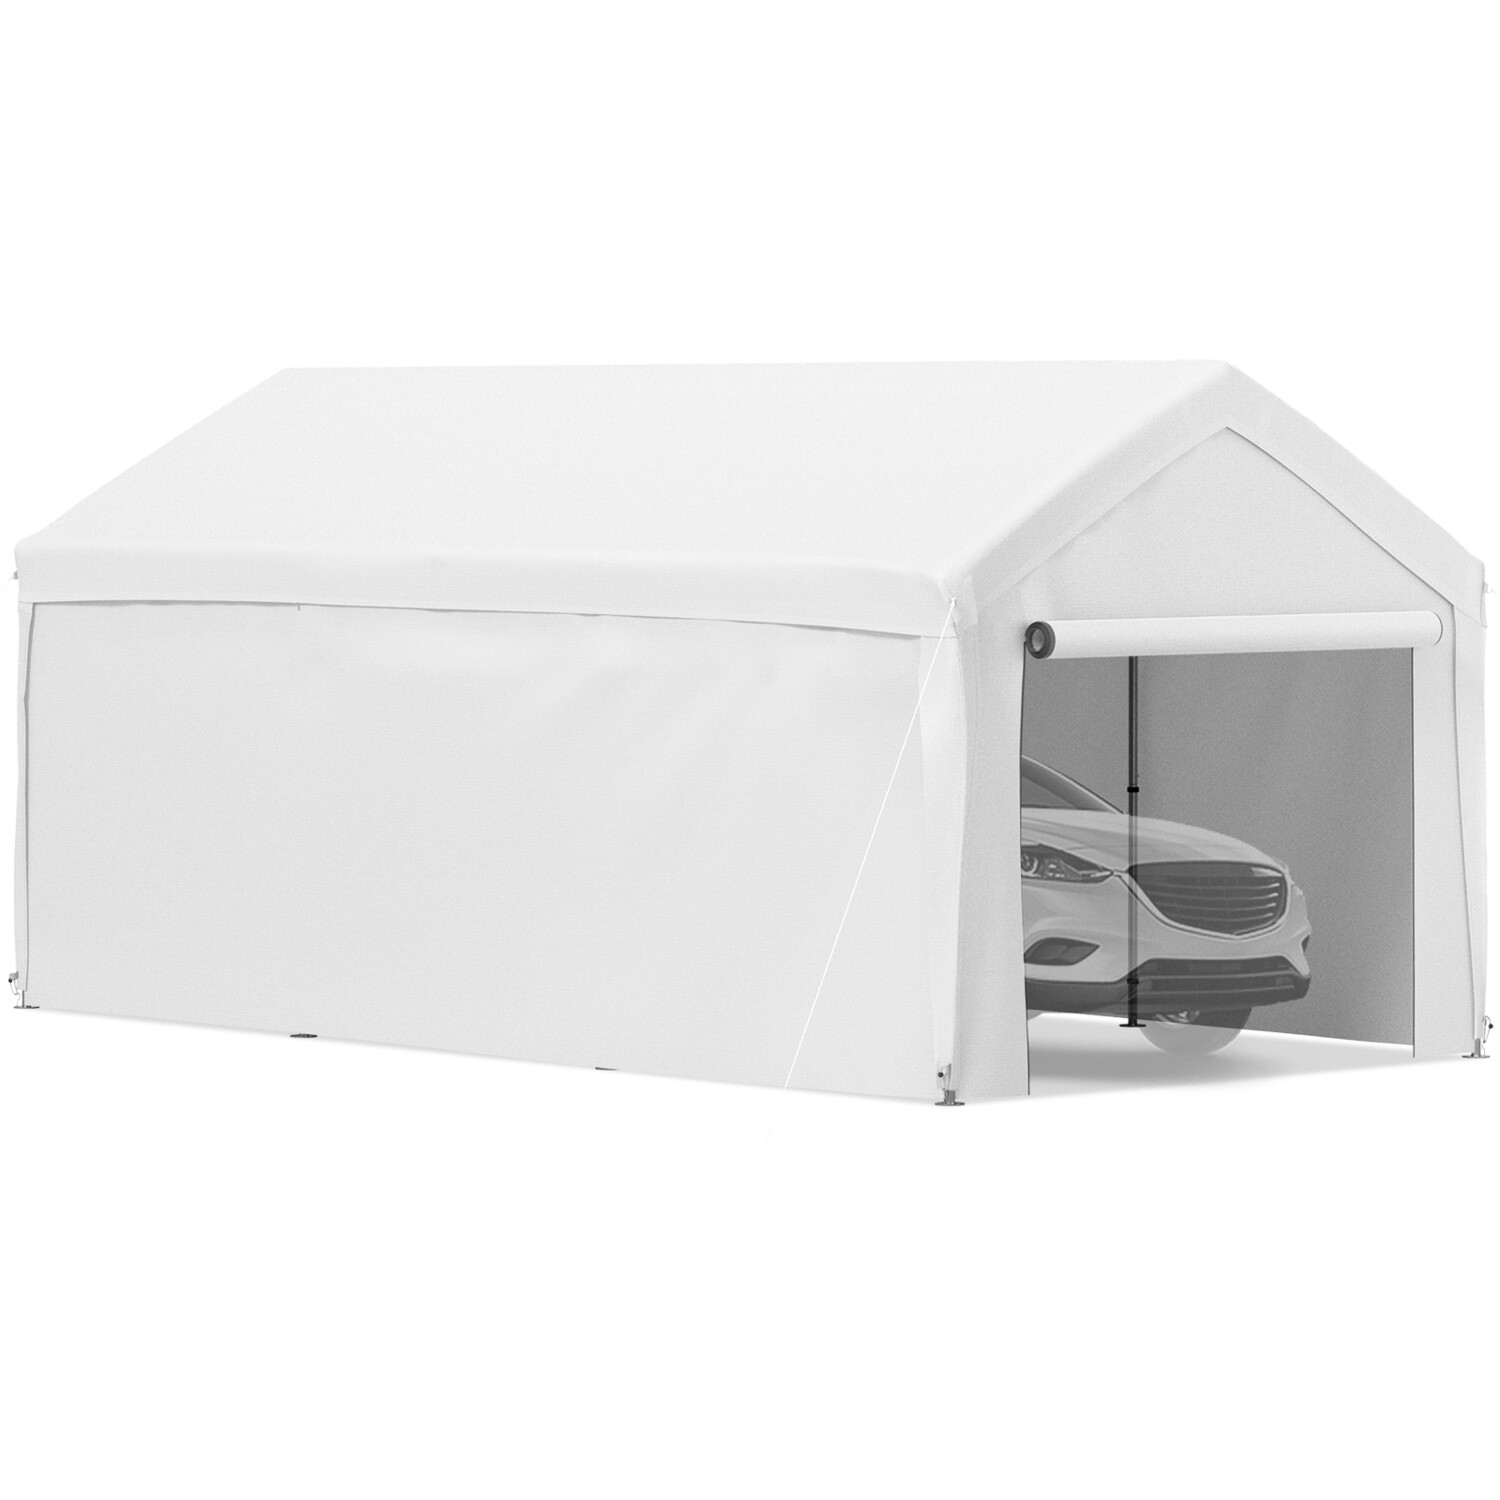 Heavy-Duty Garage Shelter with 8 Legs and Detachable Sidewalls, 13 x 20-Foot